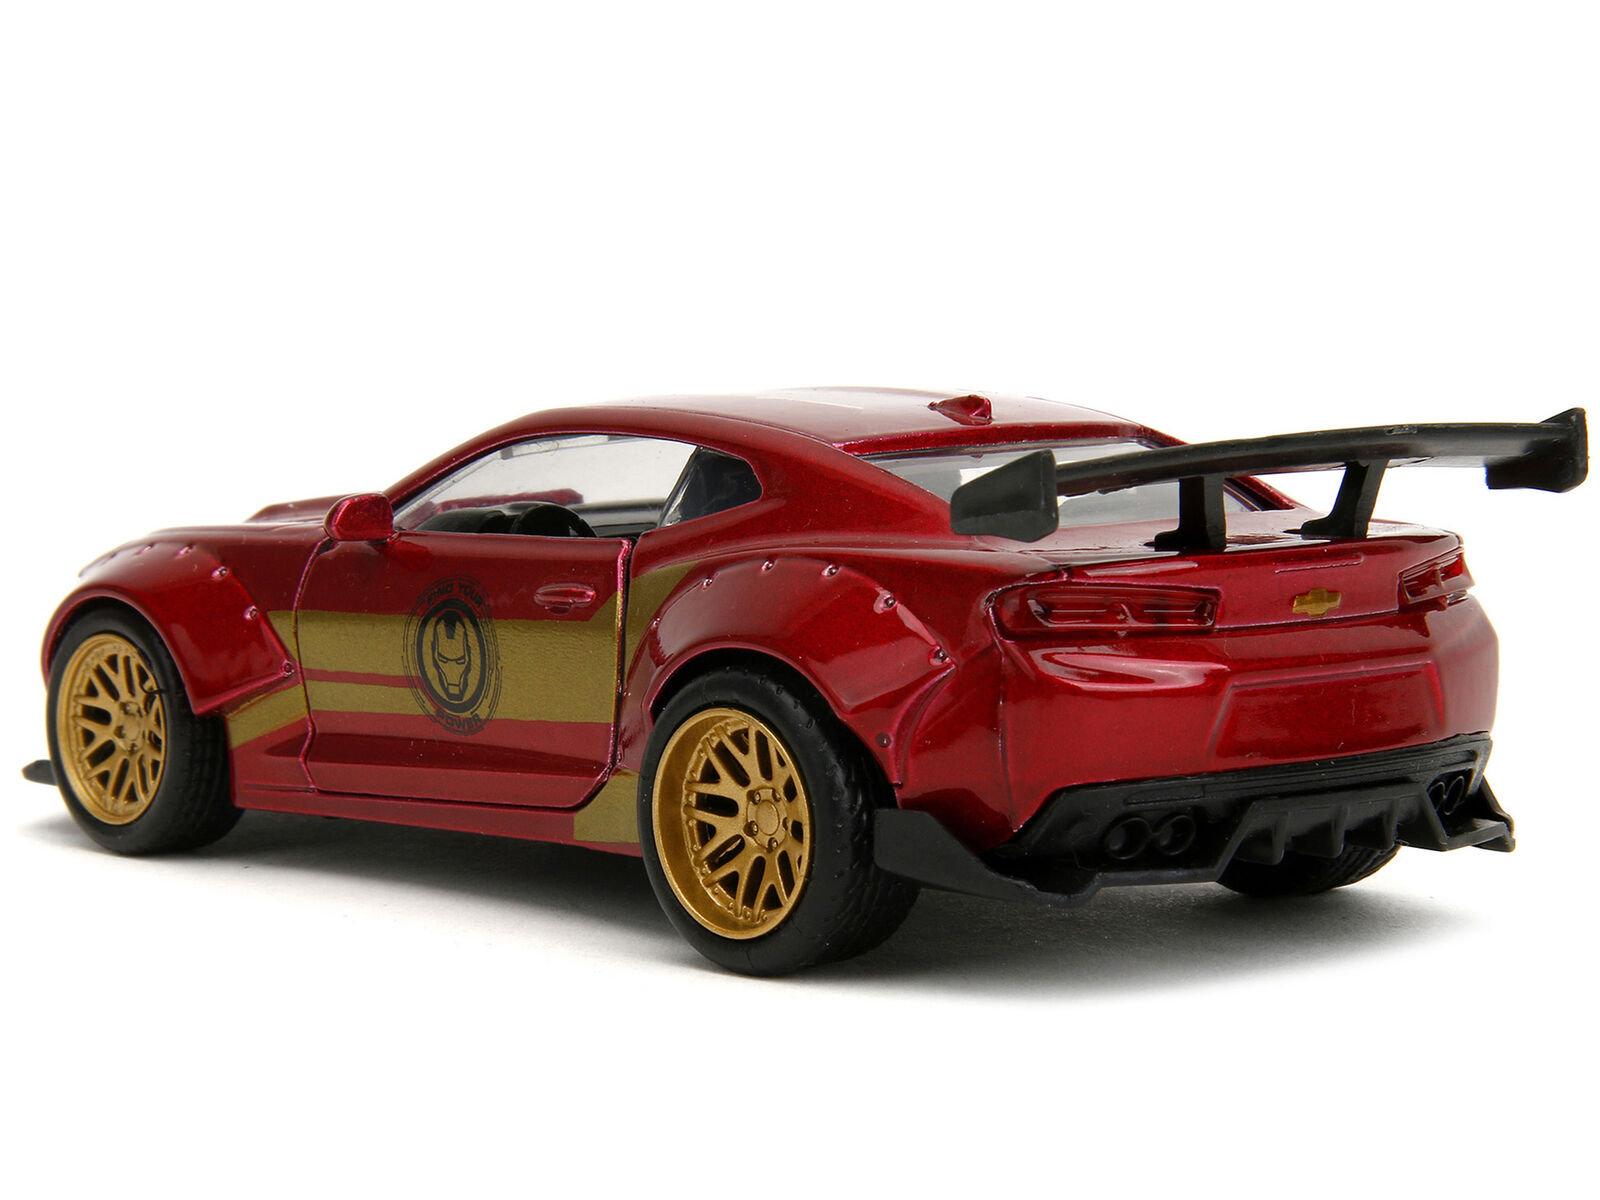 2016 Chevrolet Camaro Red Metallic and Gold and Iron Man Diecast Figure \